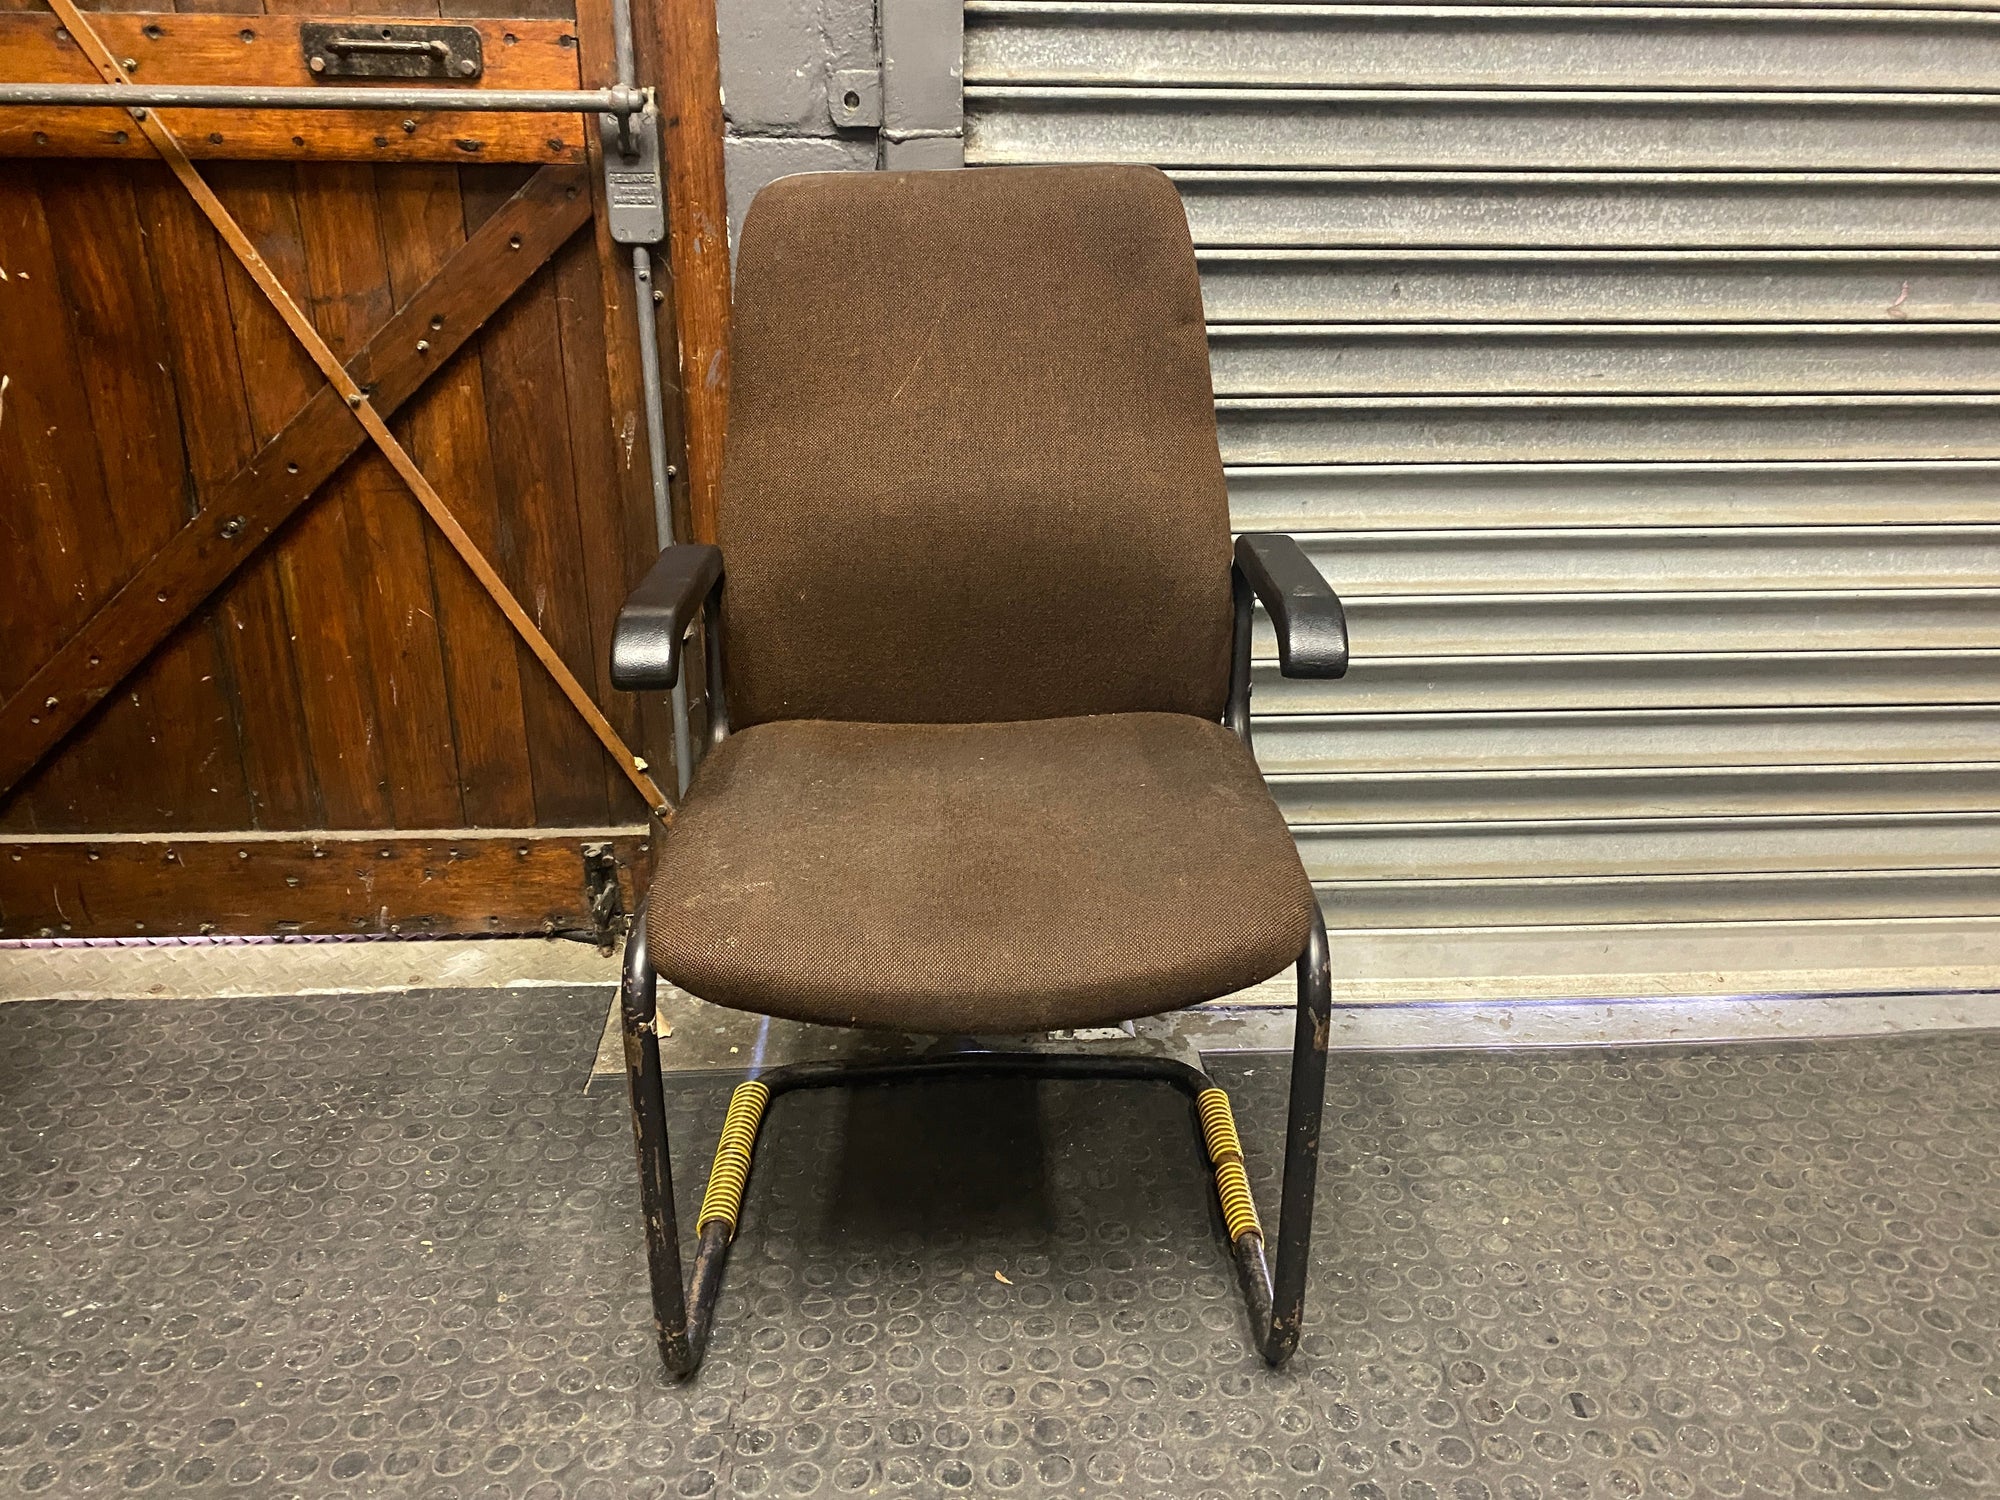 Brown Visitor Chair